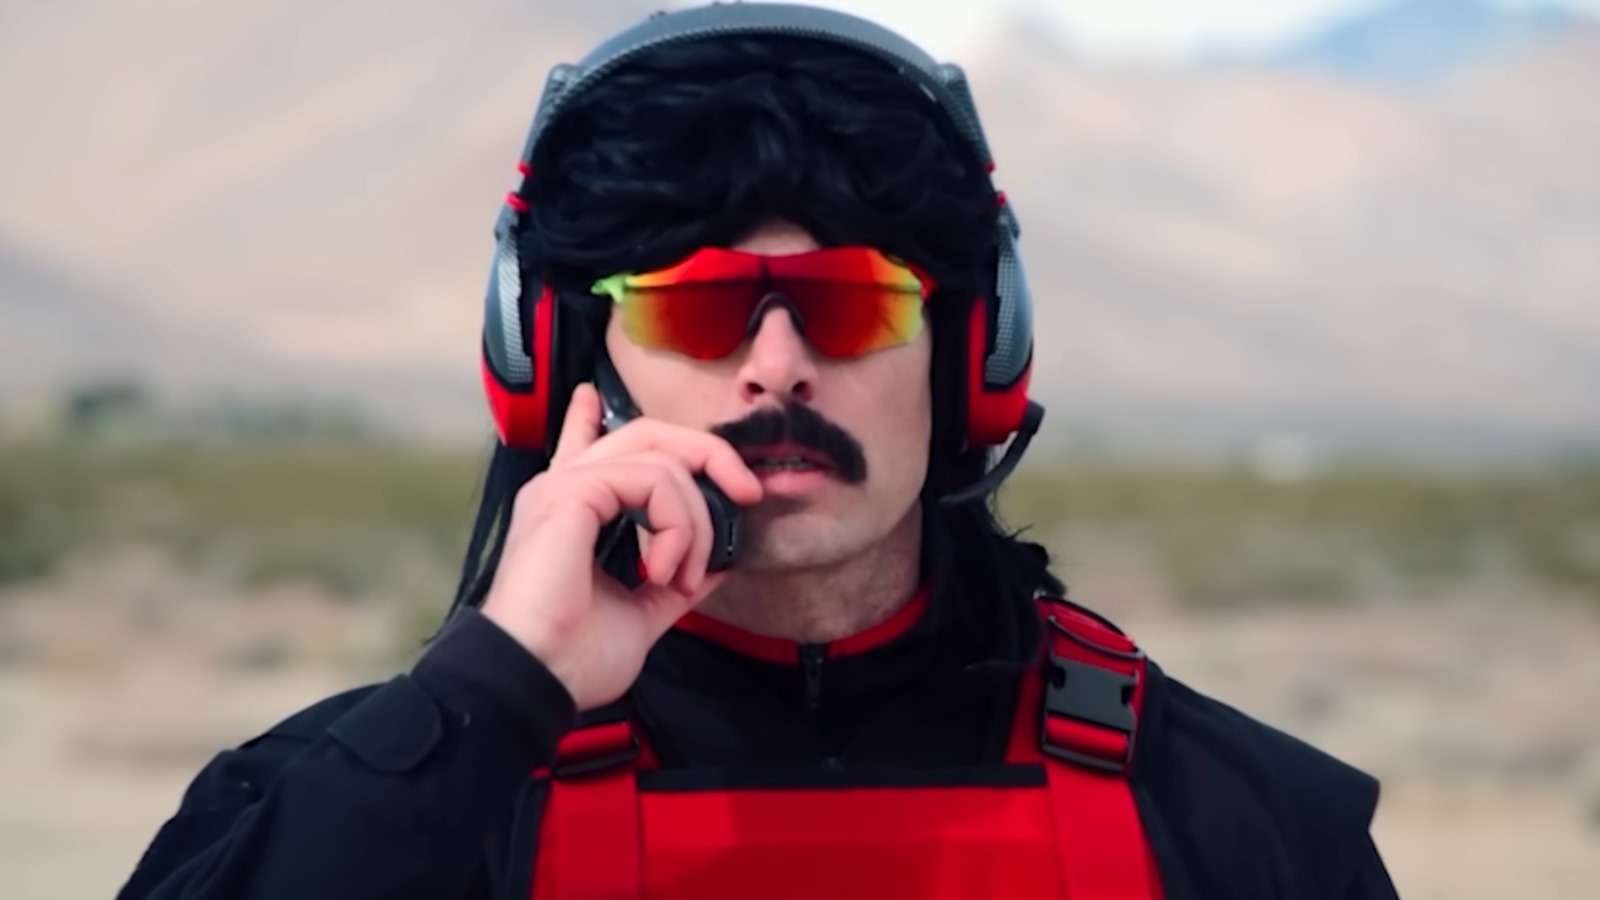 dr-disrespect-twitch-reported-to-authorities